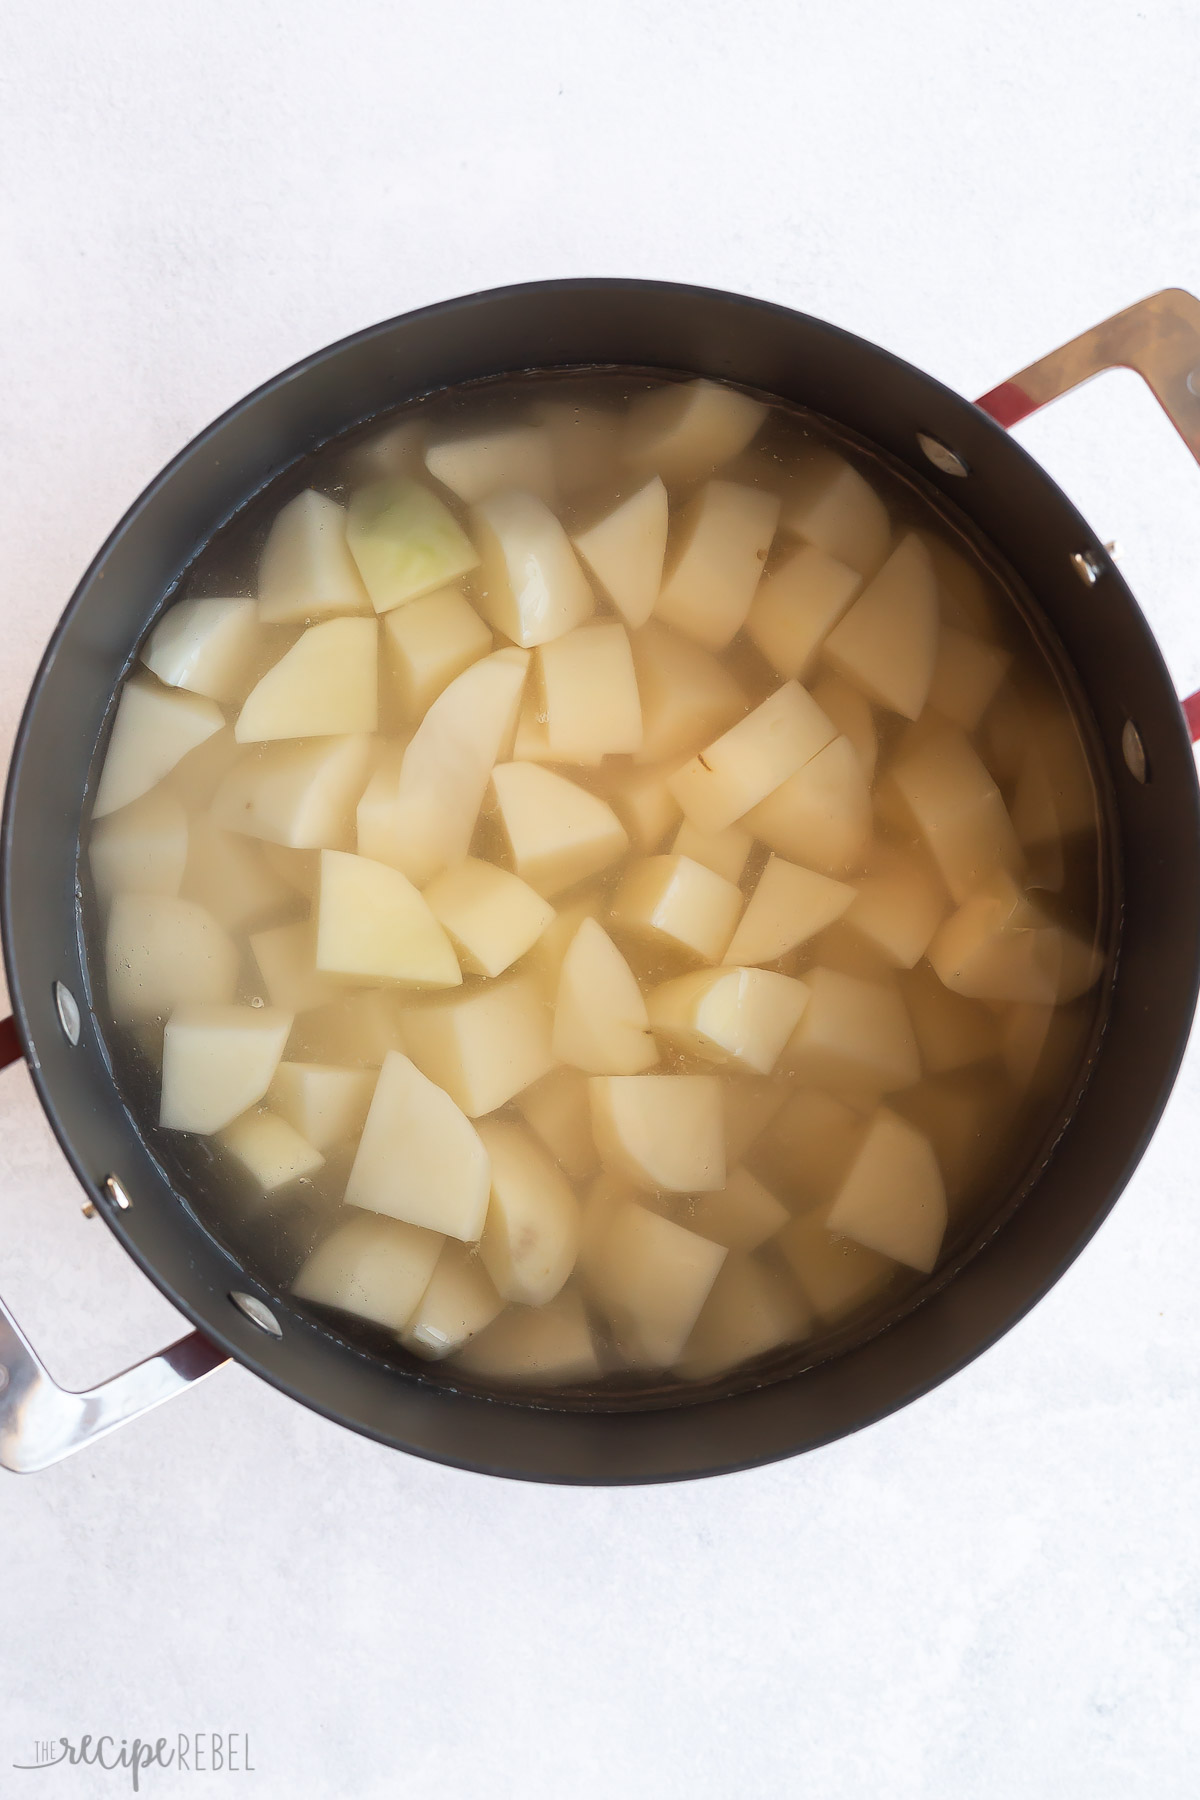 cubed potatoes in black pot of boiling water.